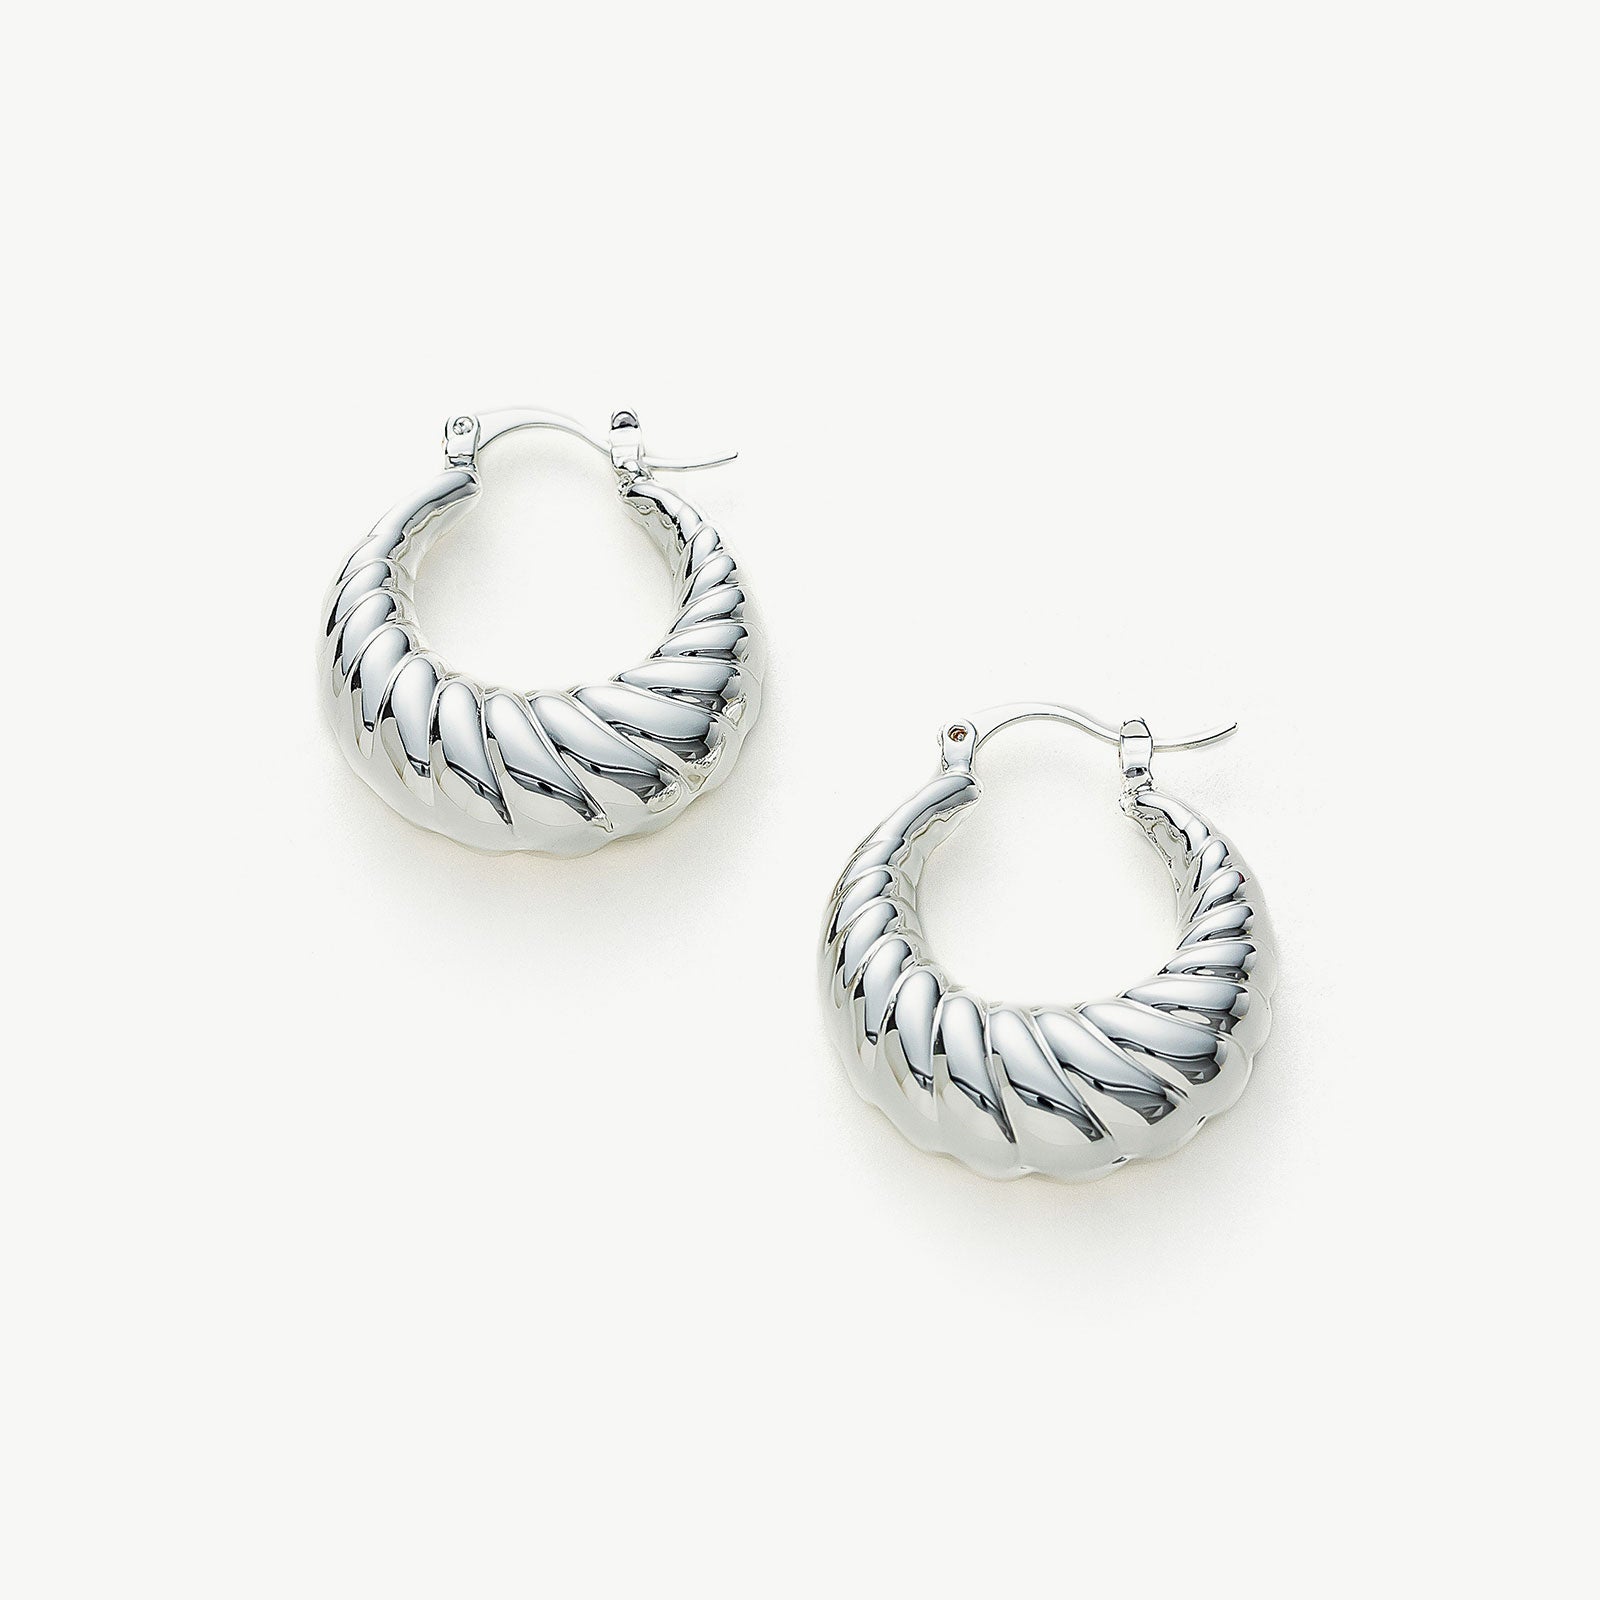 Dome Ridge Hoop Earrings, featuring a stylish dome ridge design, these earrings add a touch of elegance and modern flair to your ear ensemble